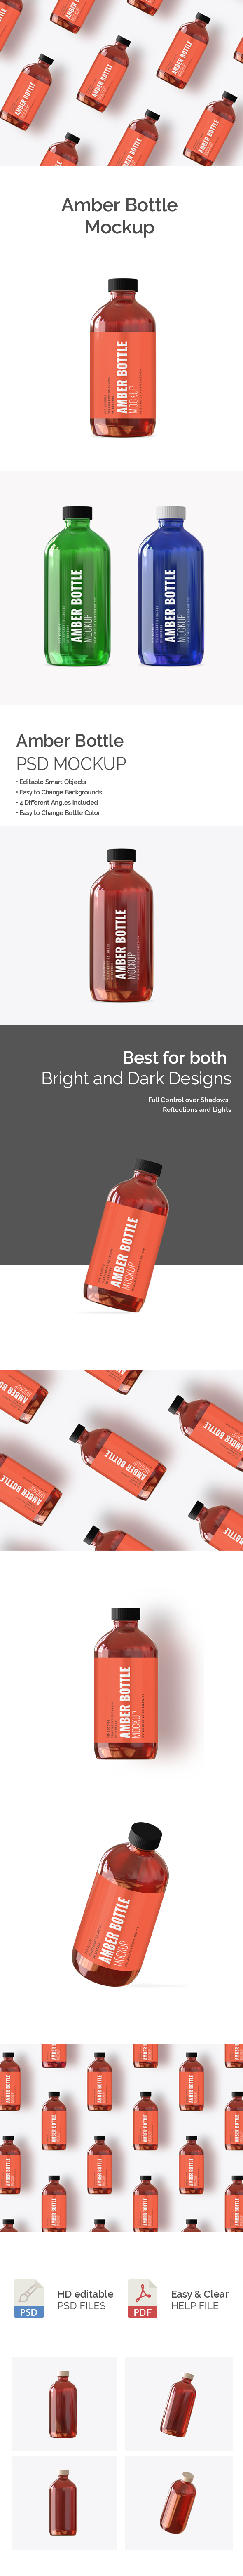 Customizable Pharma Amber Bottle Mockup in different colors and caps